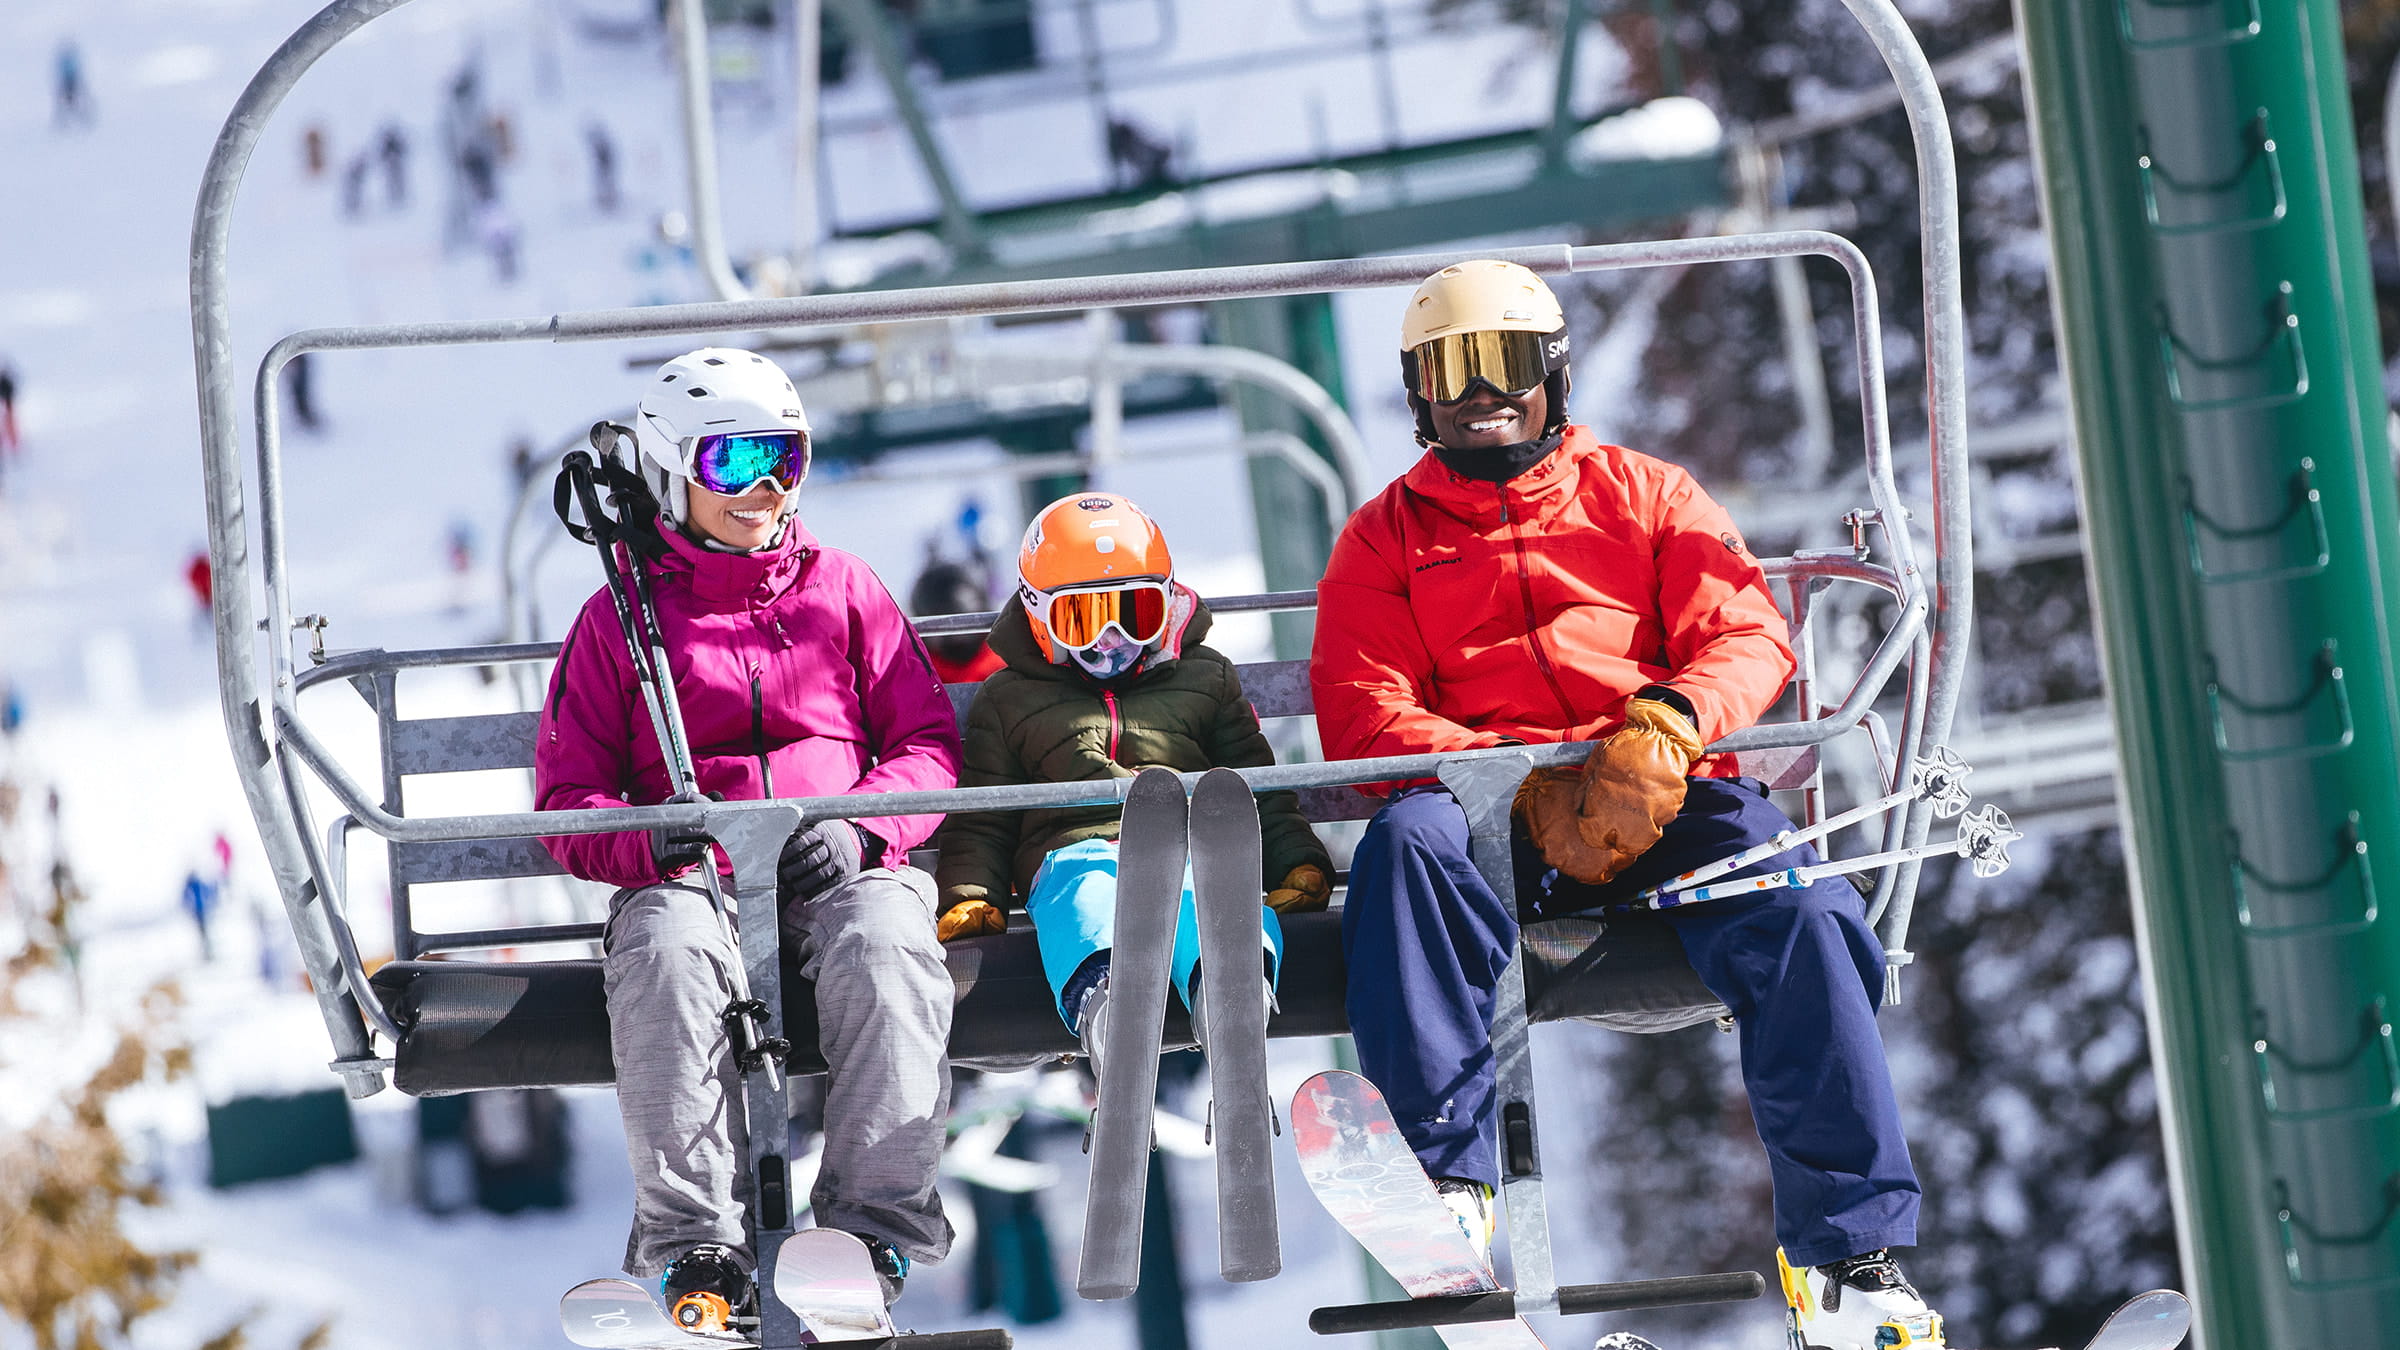 Family riding chairlift together